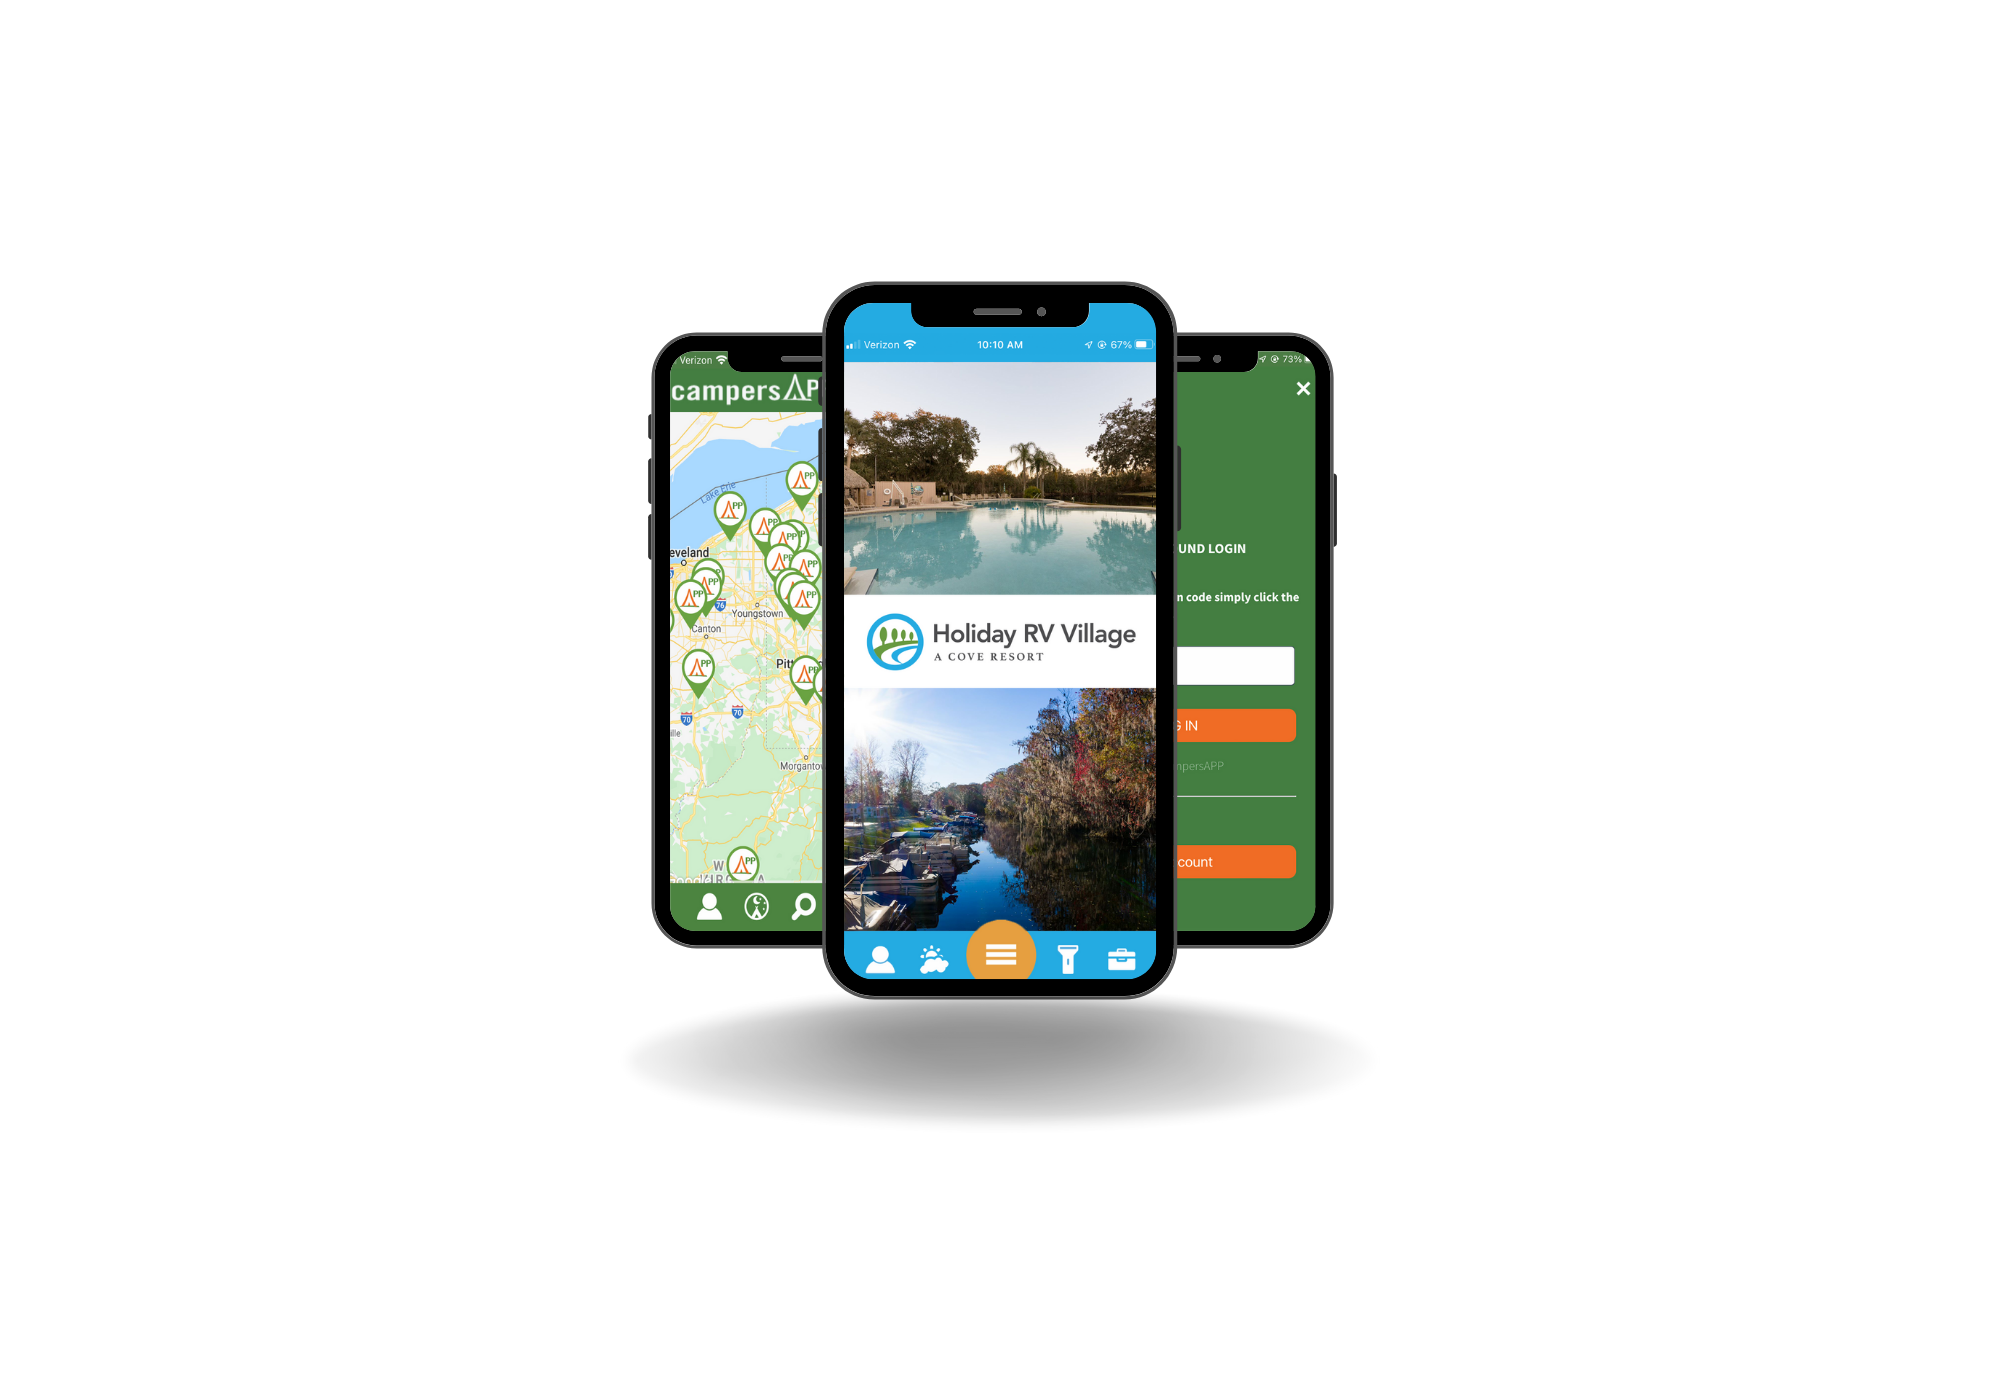 Cove’s New Resort and Community App with Augmented Reality